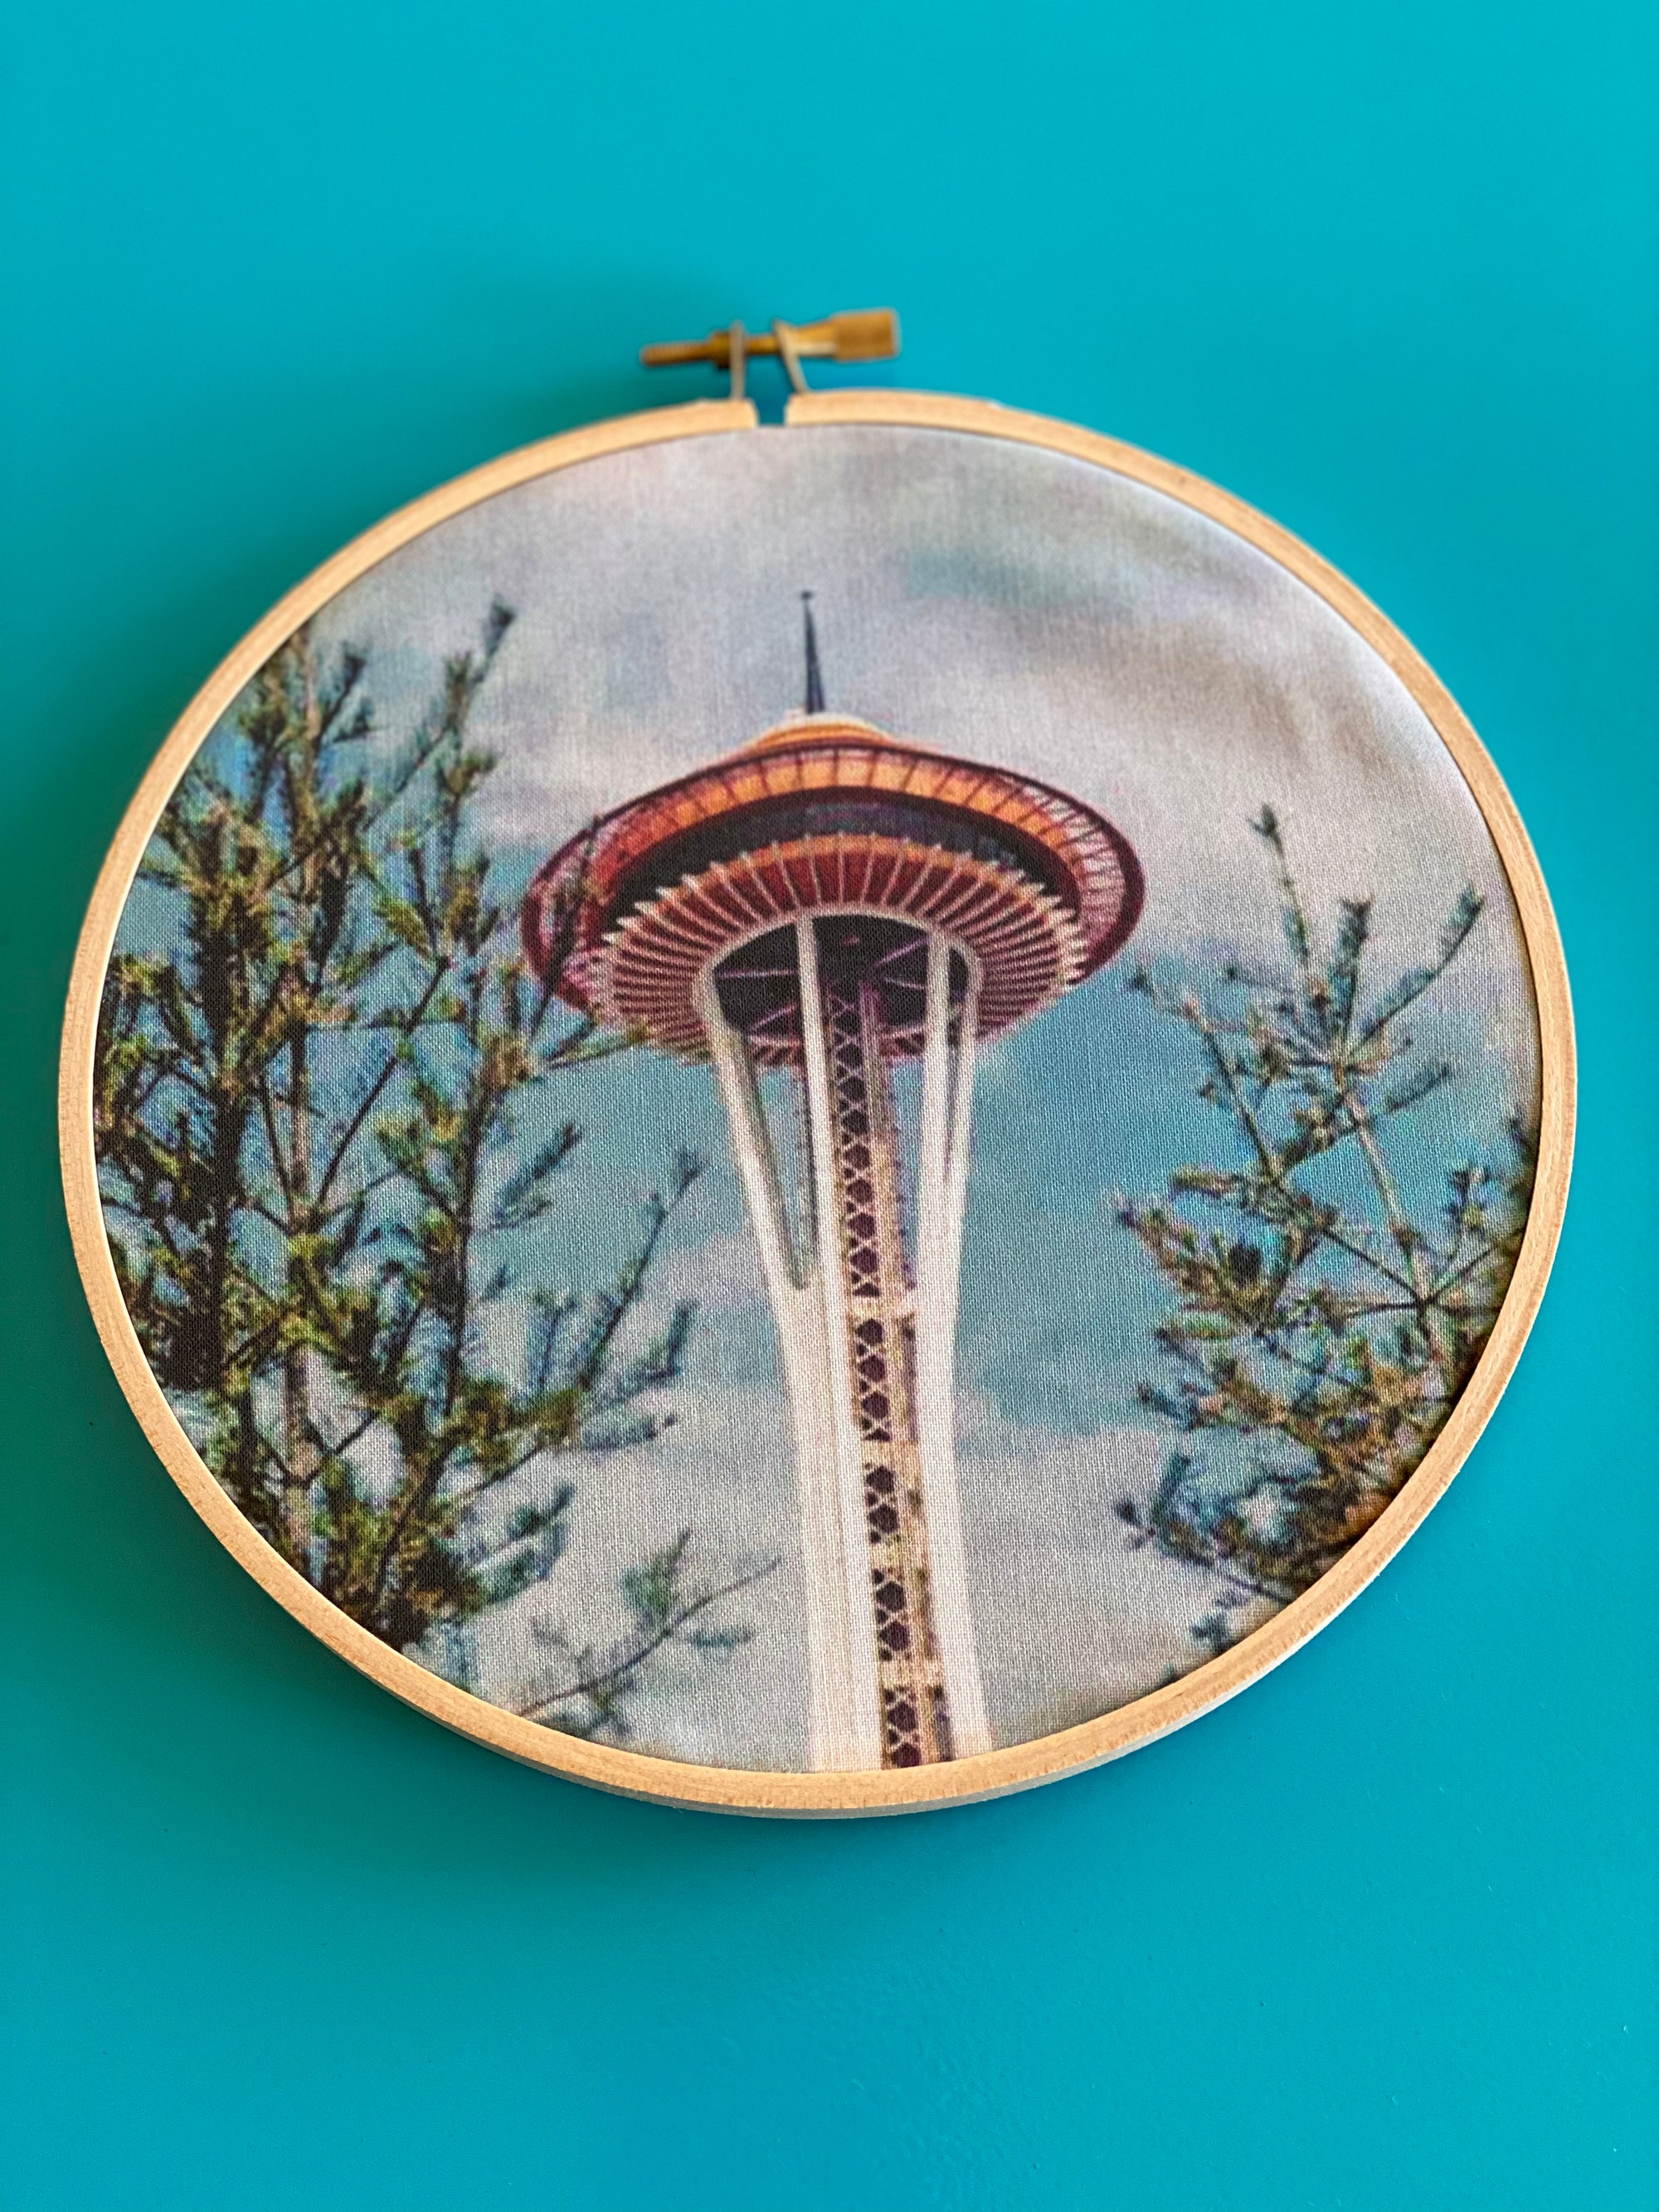 DIY Craft Kit - Embroidery - Space Needle